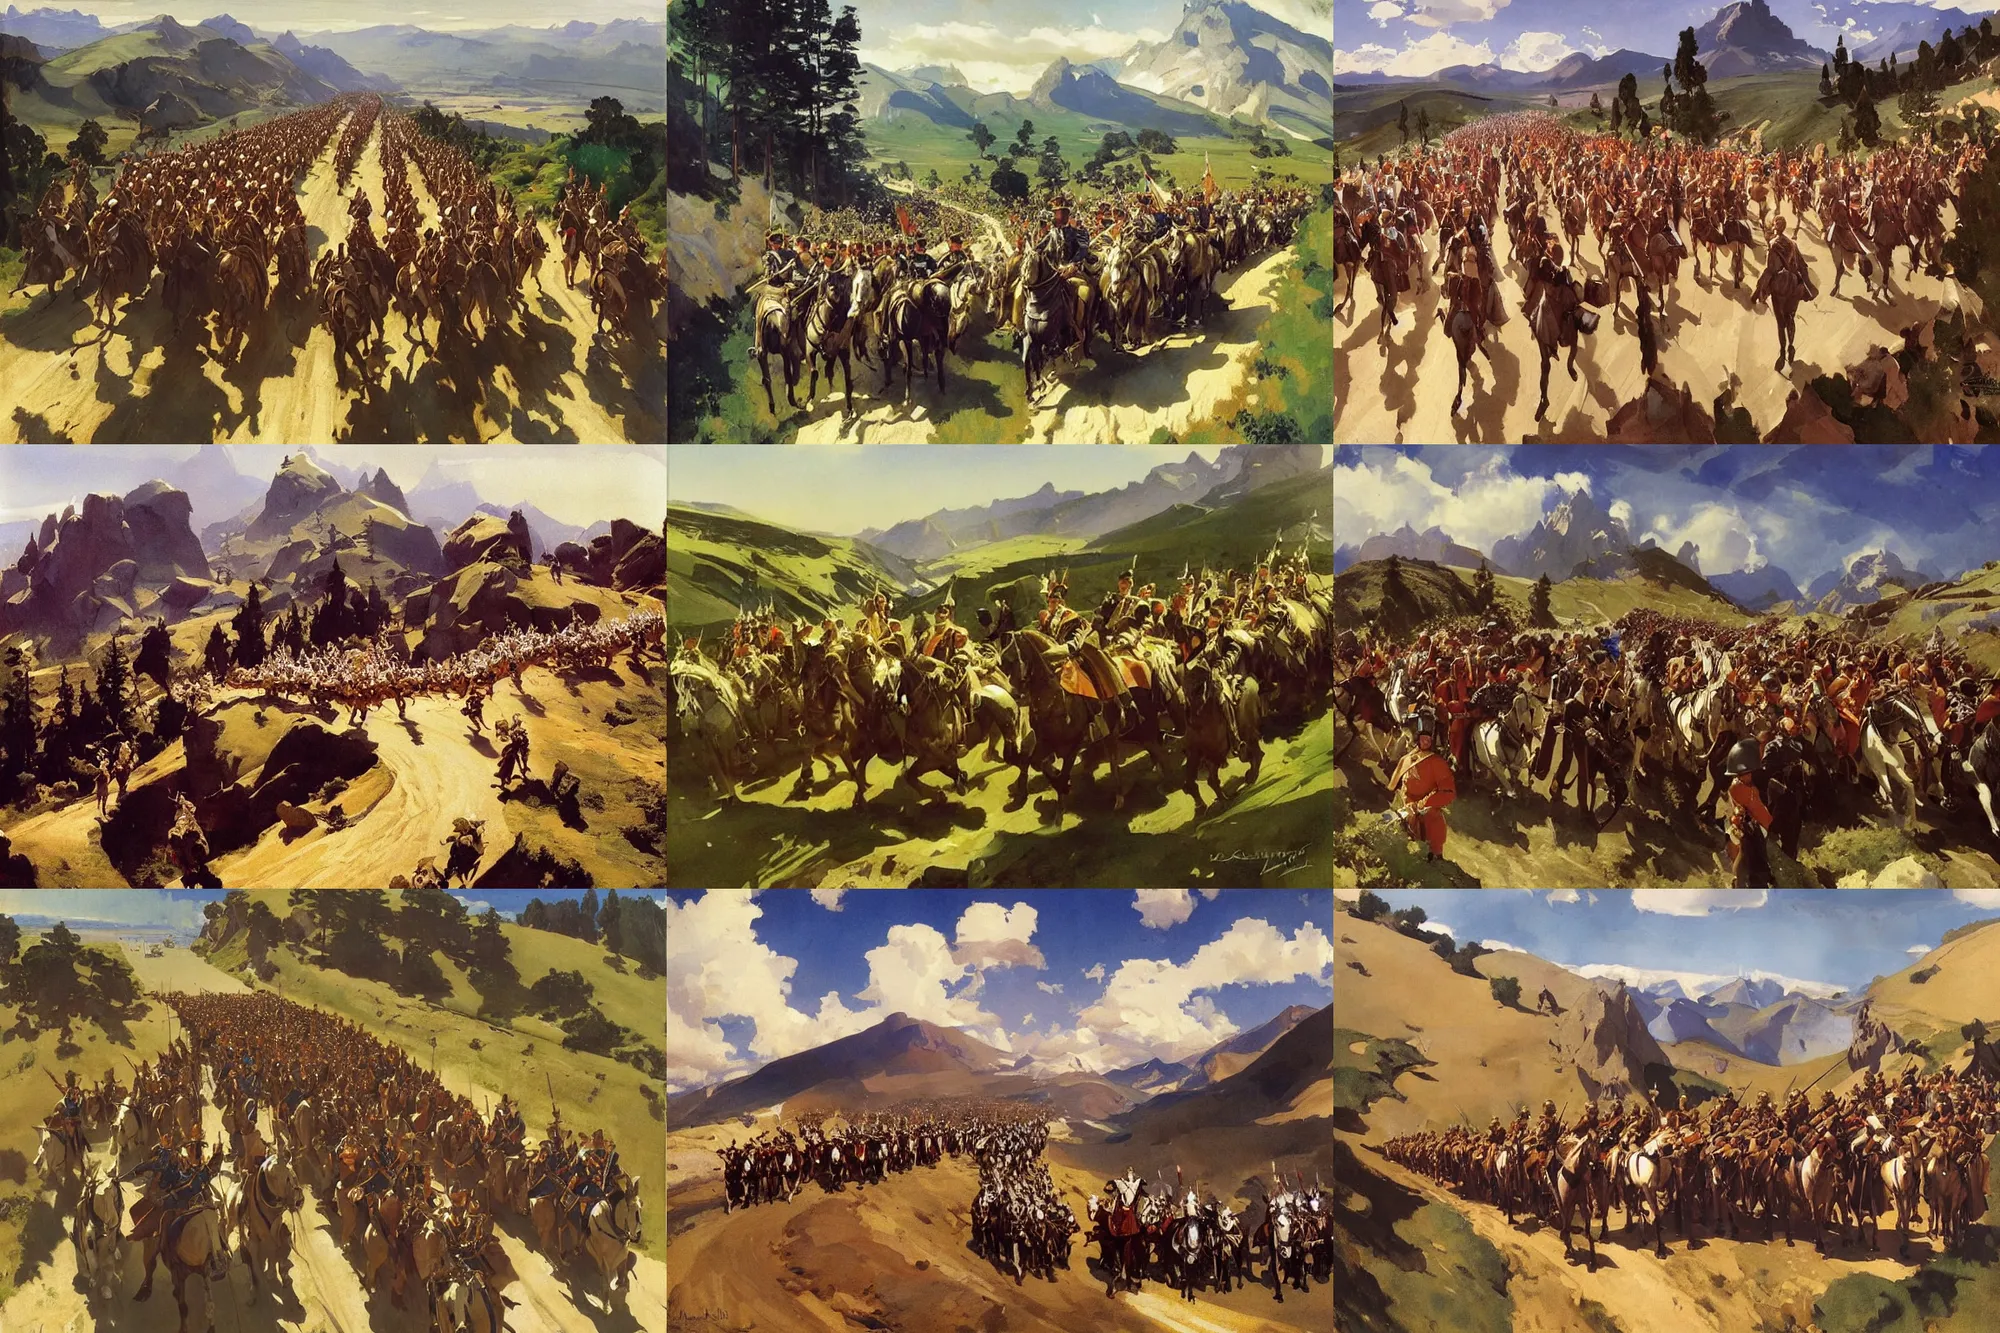 Prompt: painting by sargent and leyendecker and greg hildebrandt savrasov levitan aerial view of army of knights marching ascending mountain road, middle age, fantasy, castle